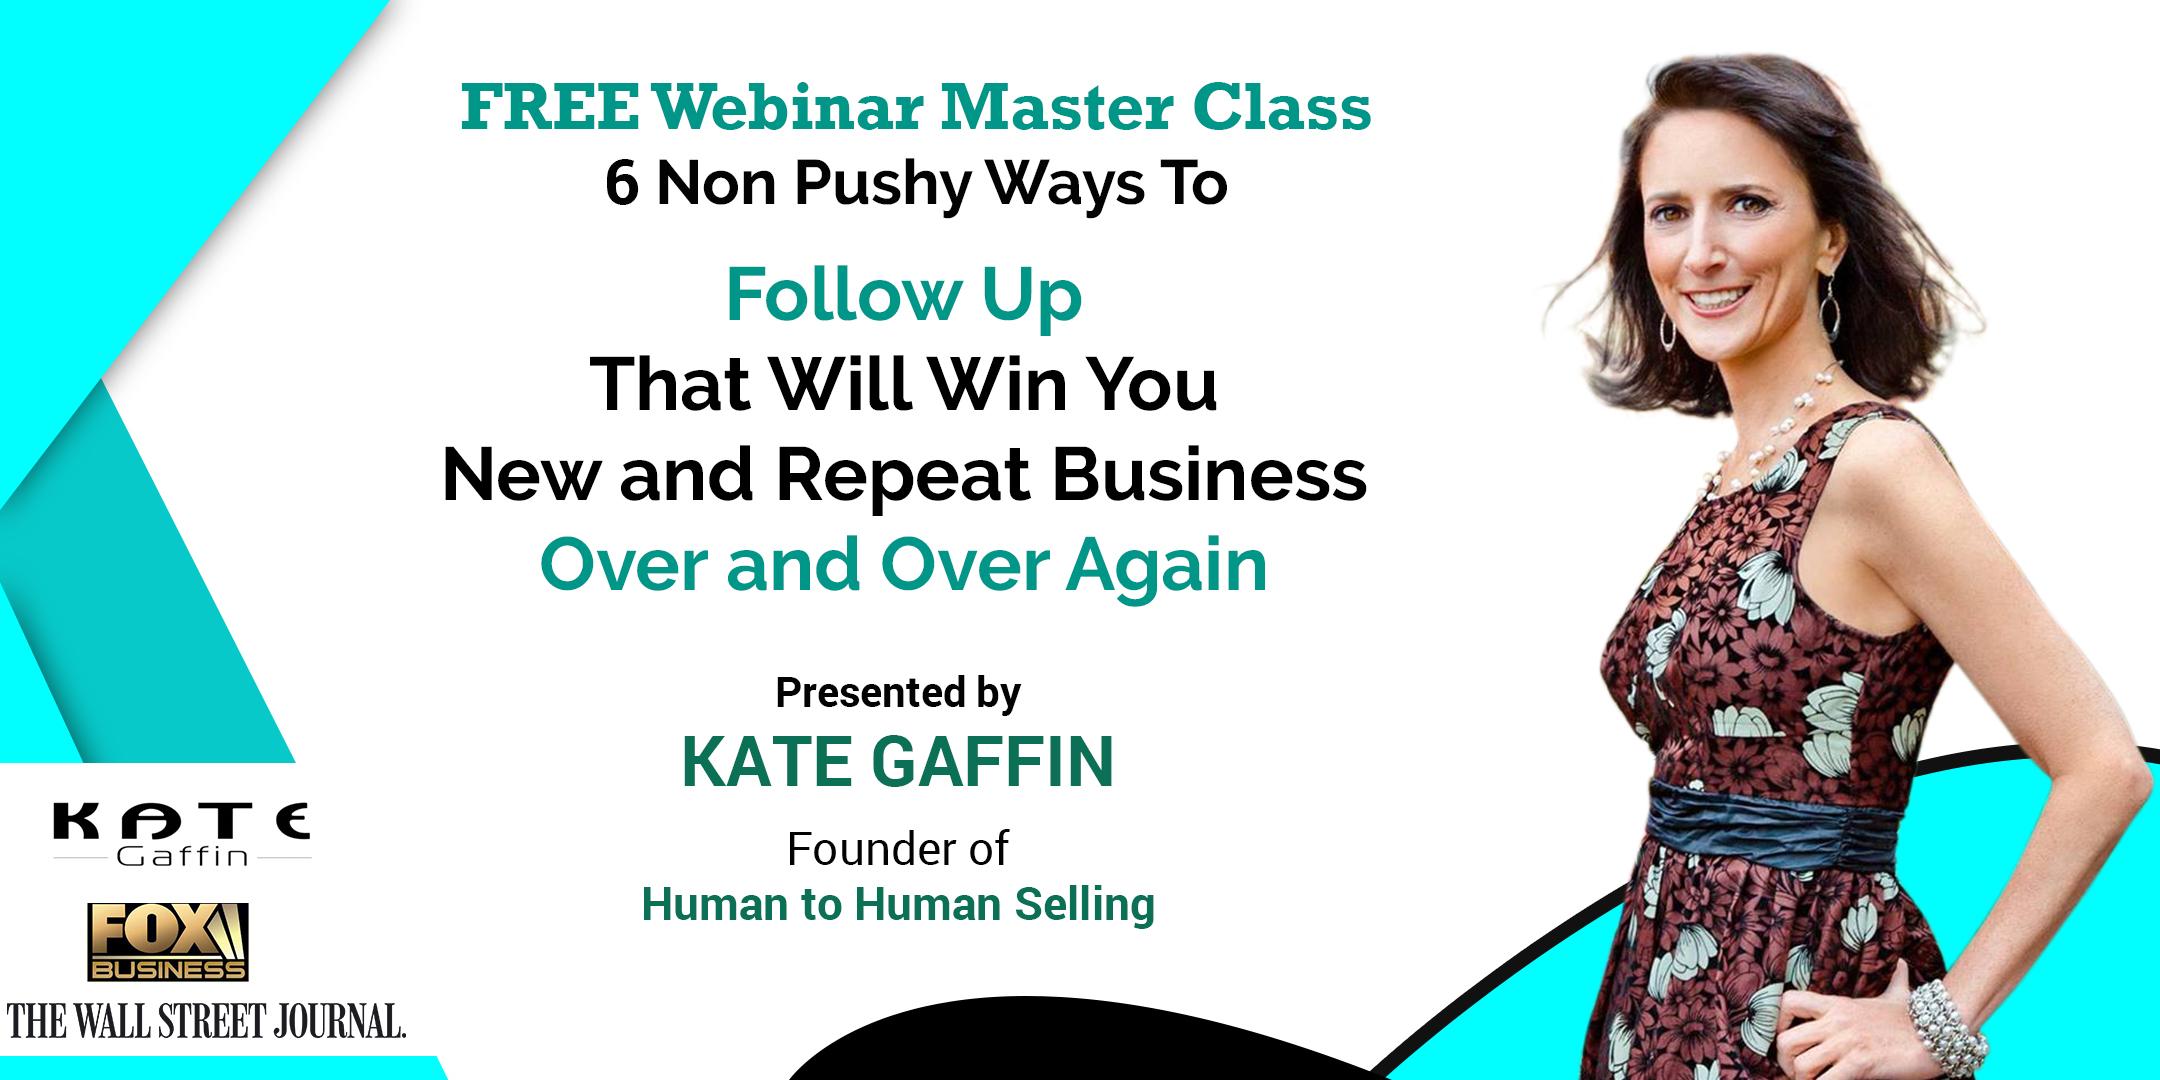  6 Non Pushy Ways to Follow Up That Will Win You New and Repeat Business Over and Over Again - Free Webinar